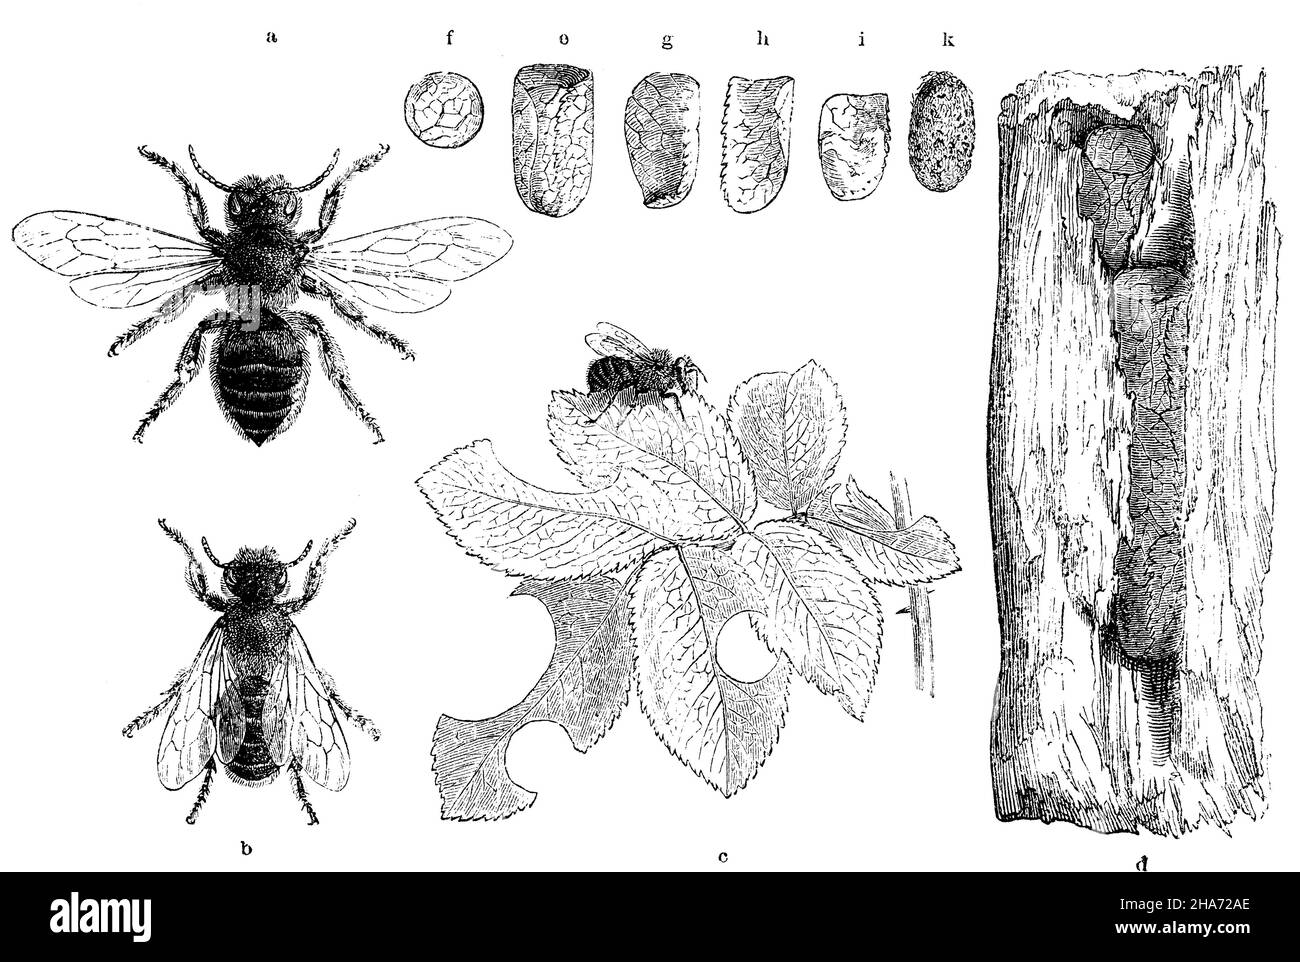 Leaf cutter. a) female, b) male, c) a rose leaf with several cutouts made by the bee, d) nest in an old willow trunk, e) single cell, f) lid piece, of it, g) and h) side pieces, i) vertical section through the cells with the food pulp lying on the bottom, k) cocoon, ,  (zoology book, 1872) Stock Photo